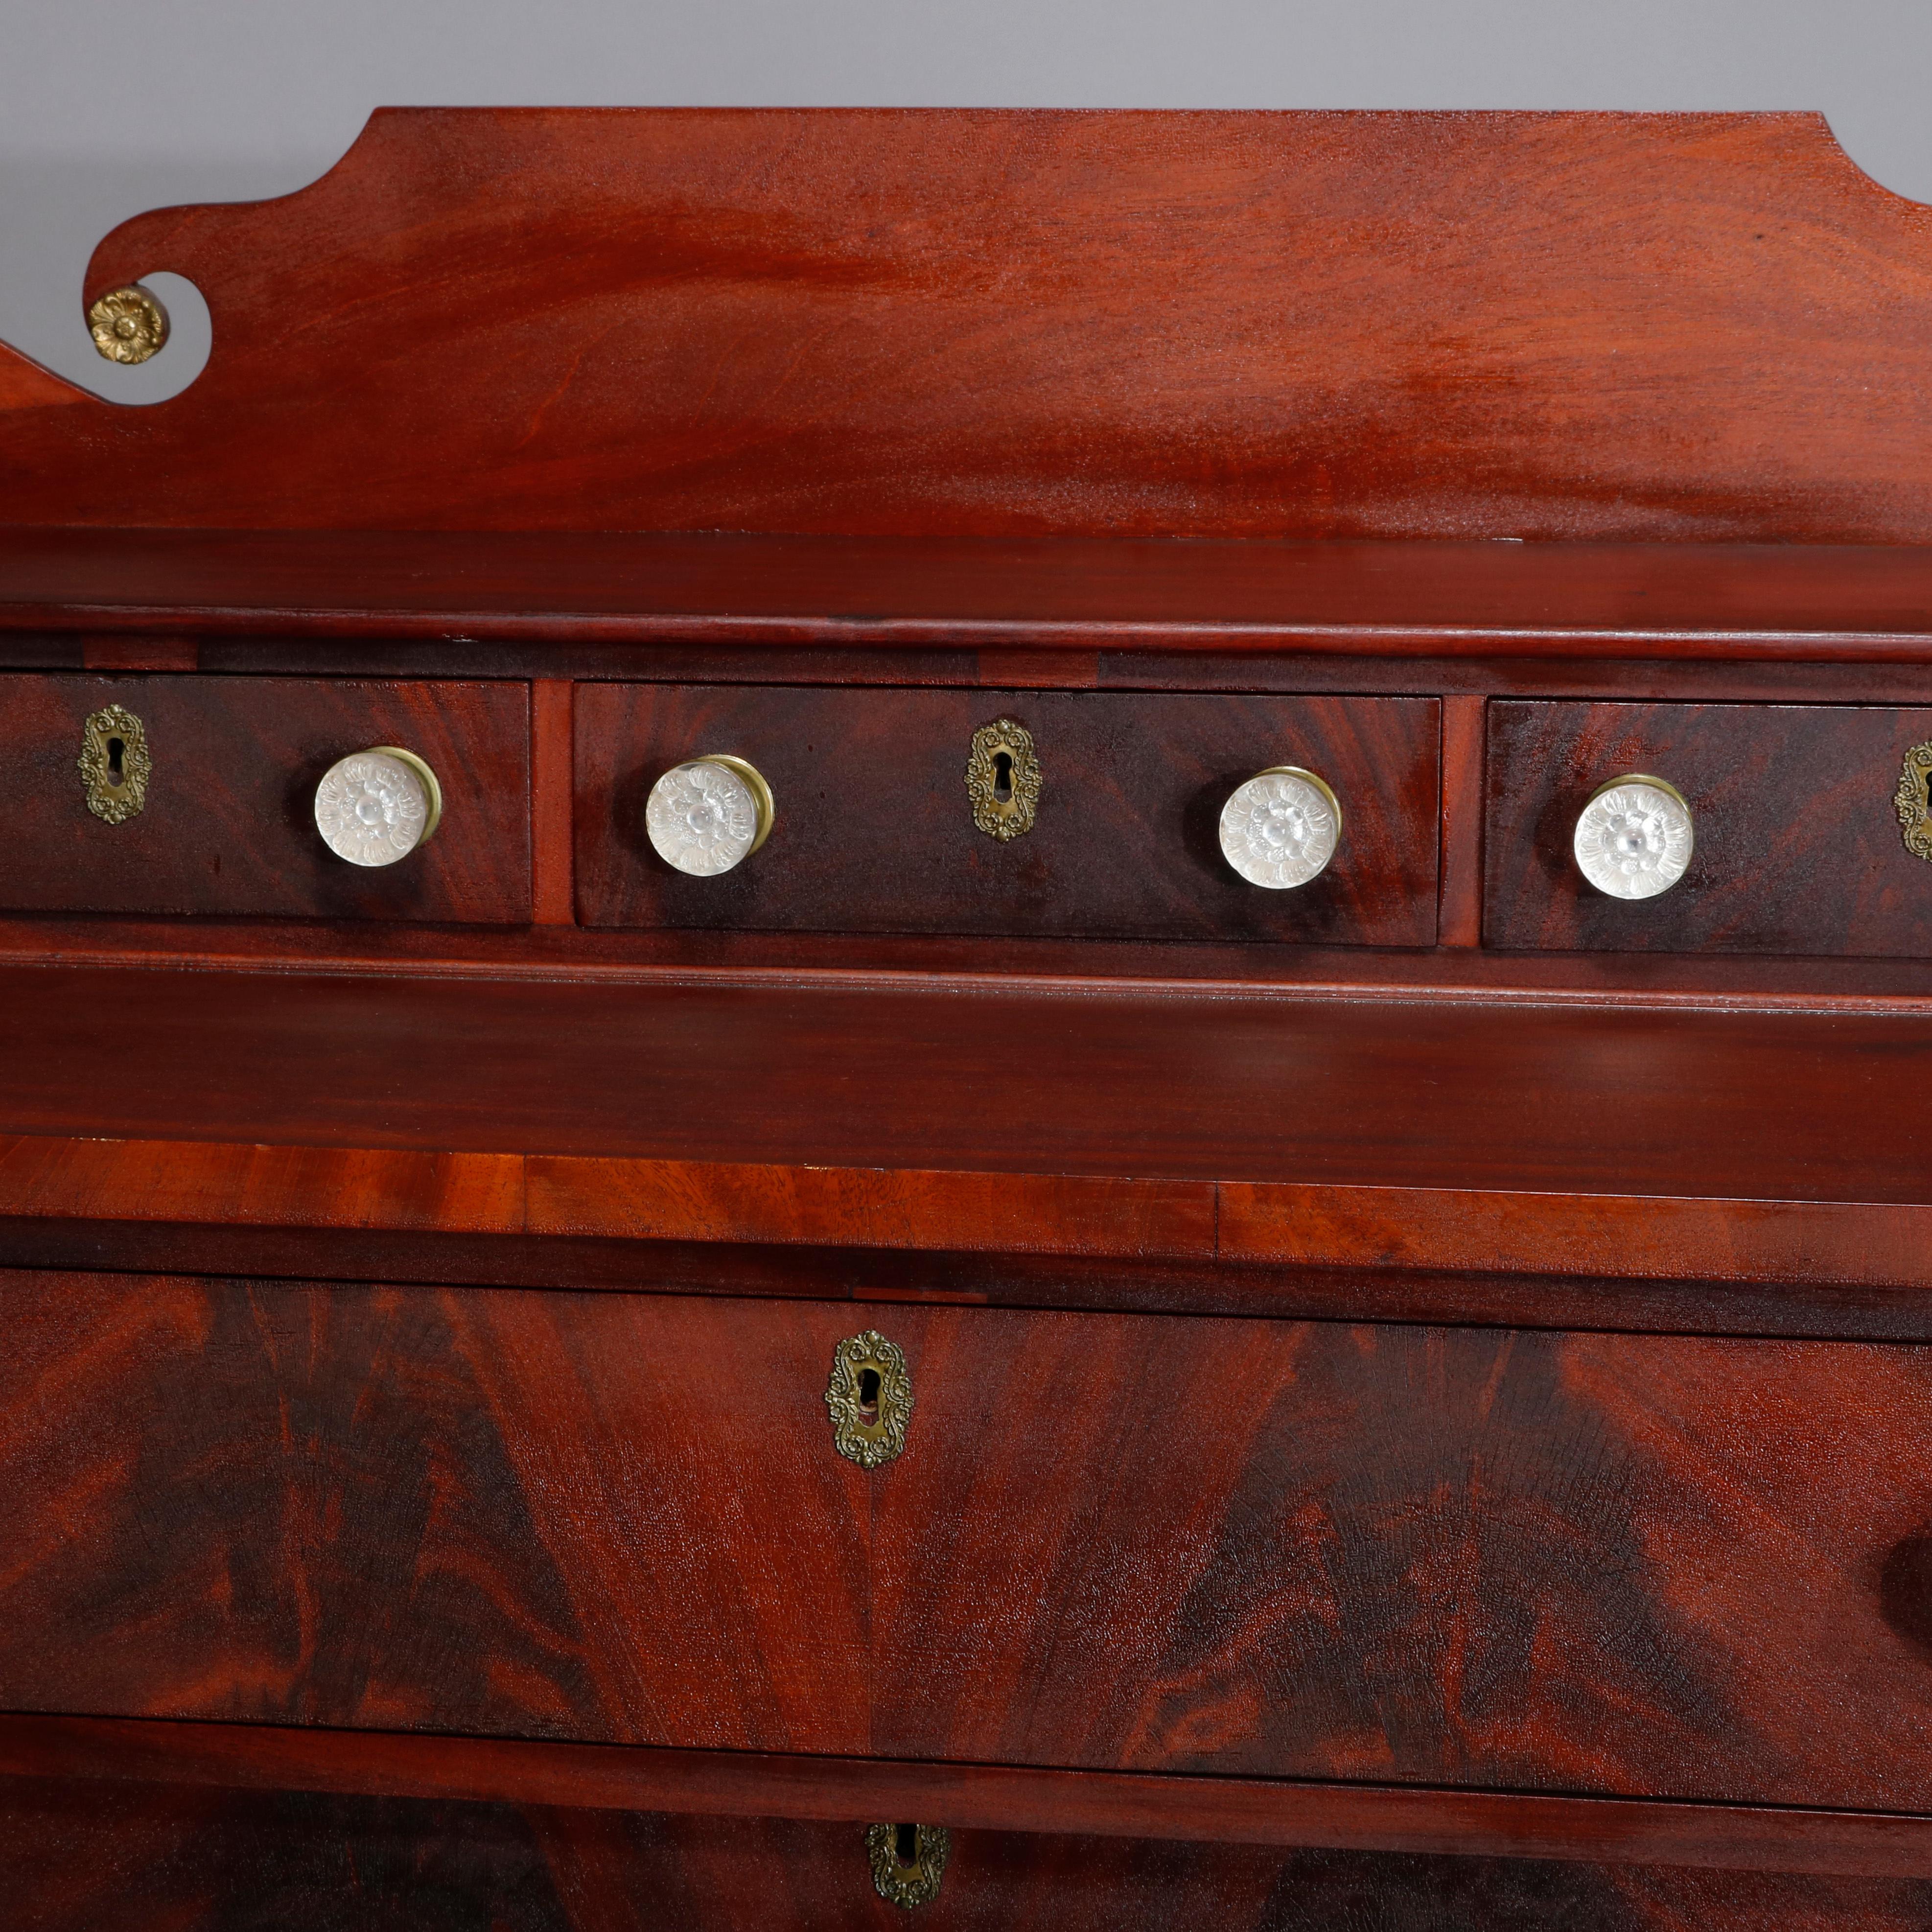 Carved Antique American Empire Flame Mahogany Chest of Drawers, circa 1840